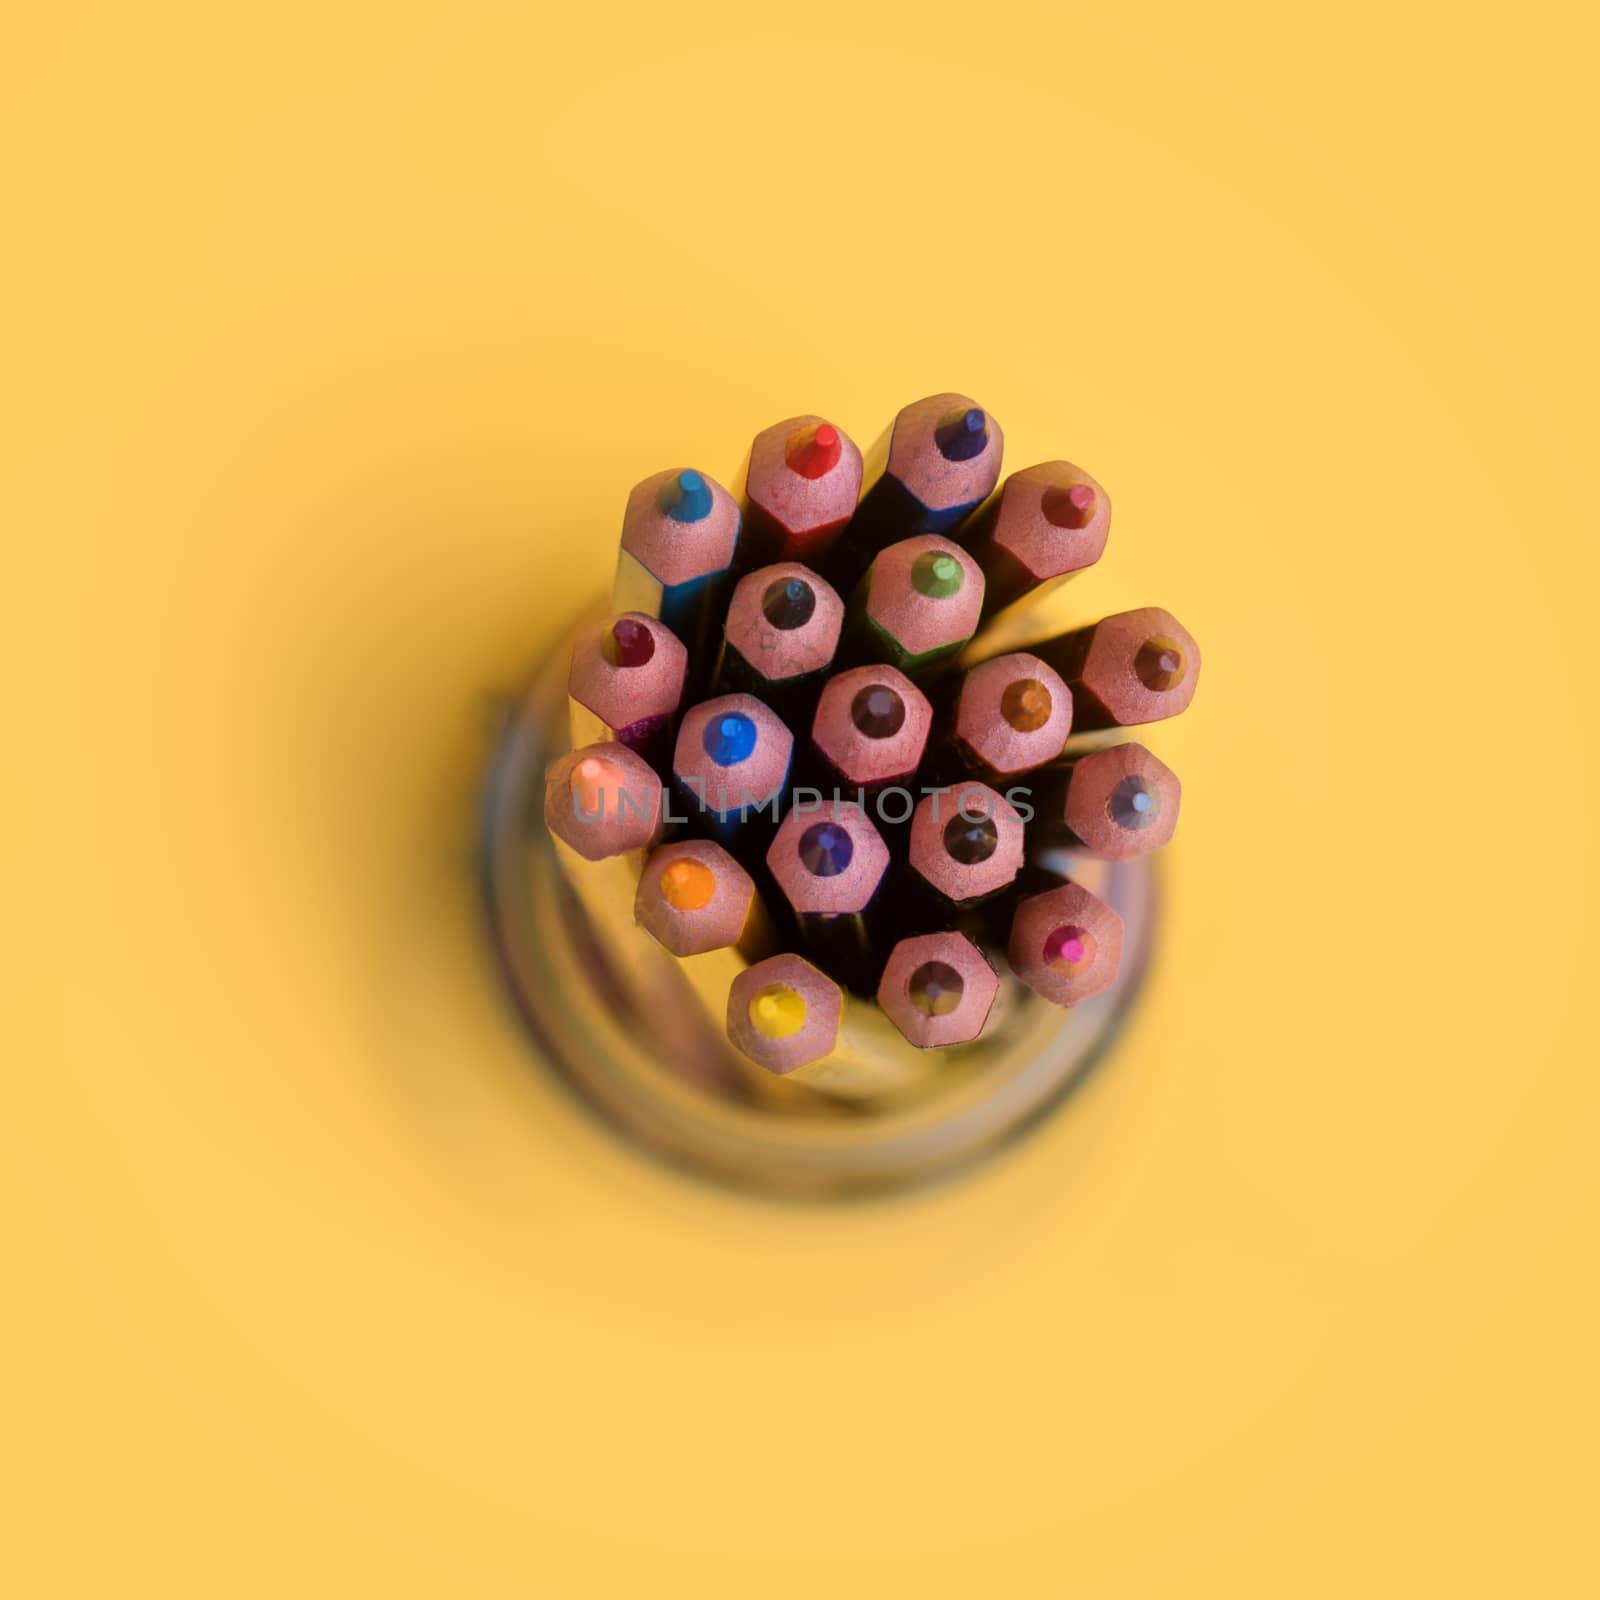 Coloured pencils in a jar on a yellow background by Iryna_Melnyk